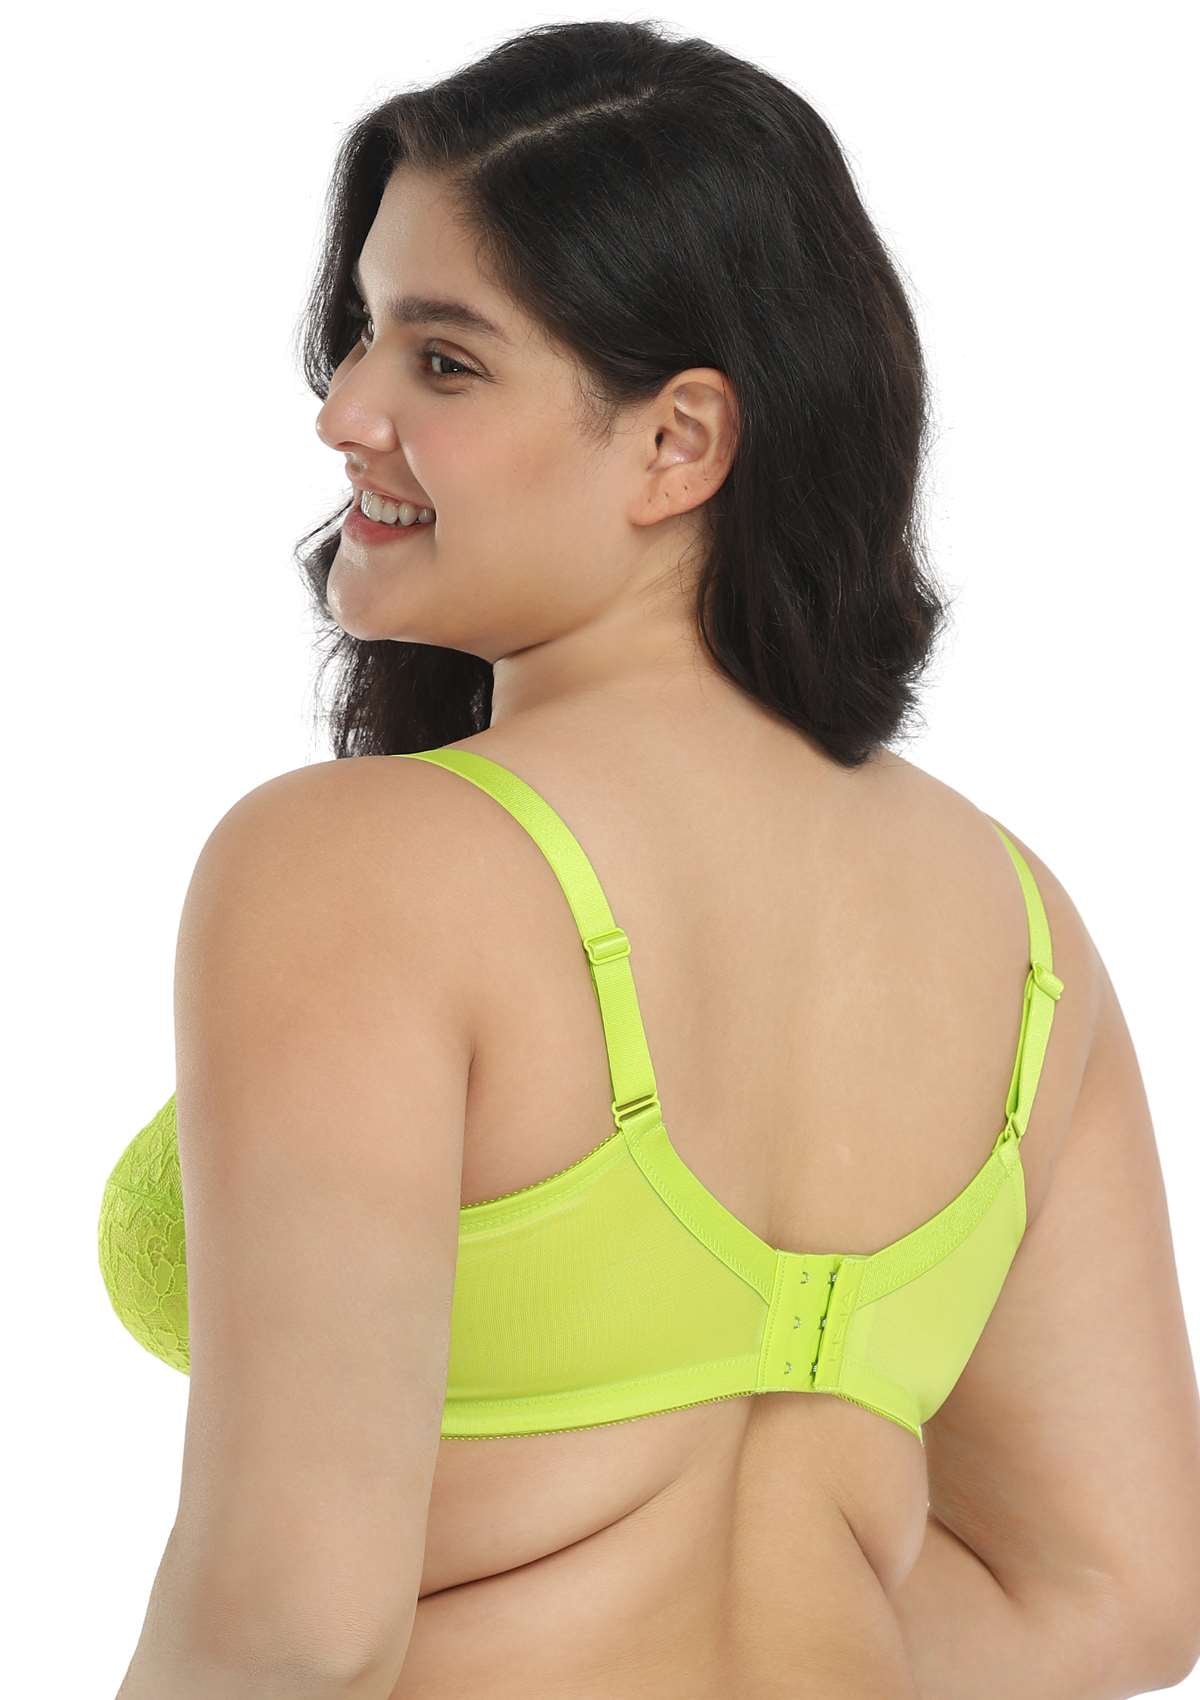 HSIA Enchante Full Cup Minimizing Bra: Supportive Unlined Lace Bra - Lime Green / 36 / C